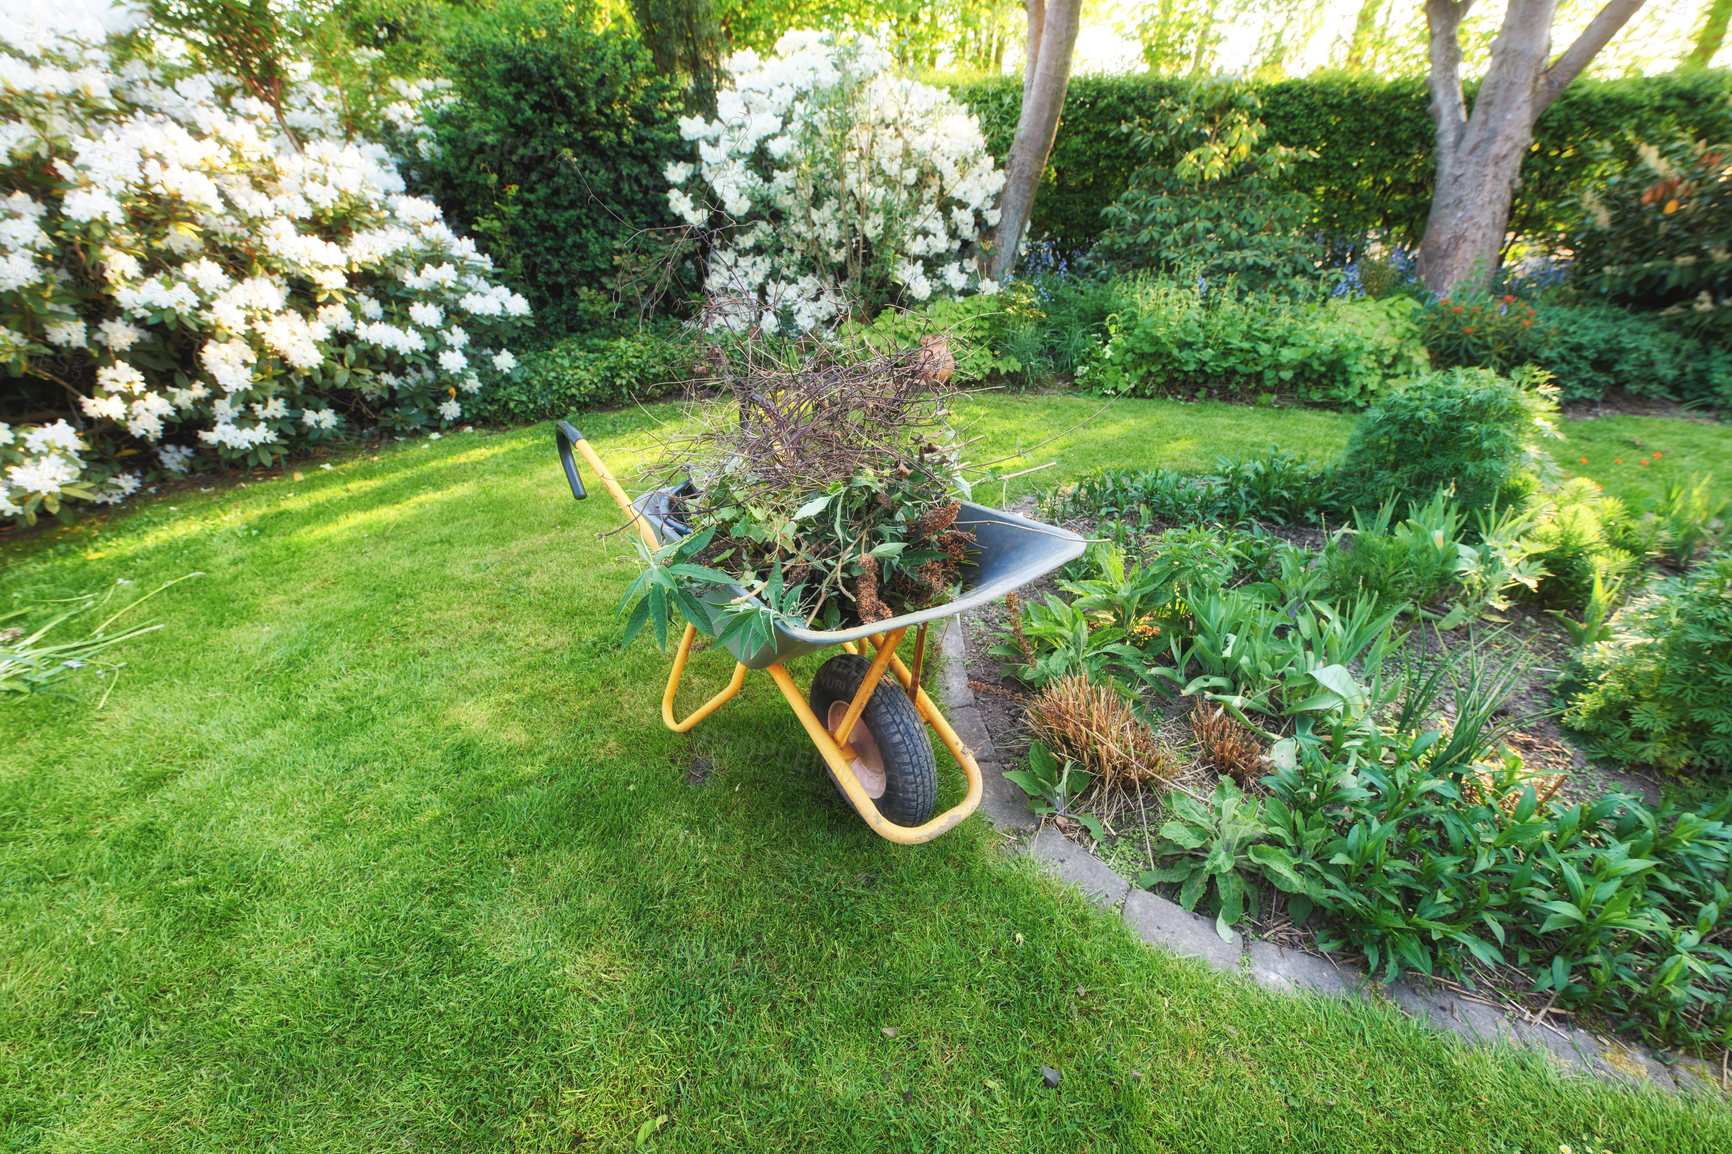 Buy stock photo Wheelbarrow carrying dead plants and weeds in a botanical garden. Gardening or cleanup work in a botanical garden in a backyard. Landscaping equipment and tools after cleanup on the lawn outside